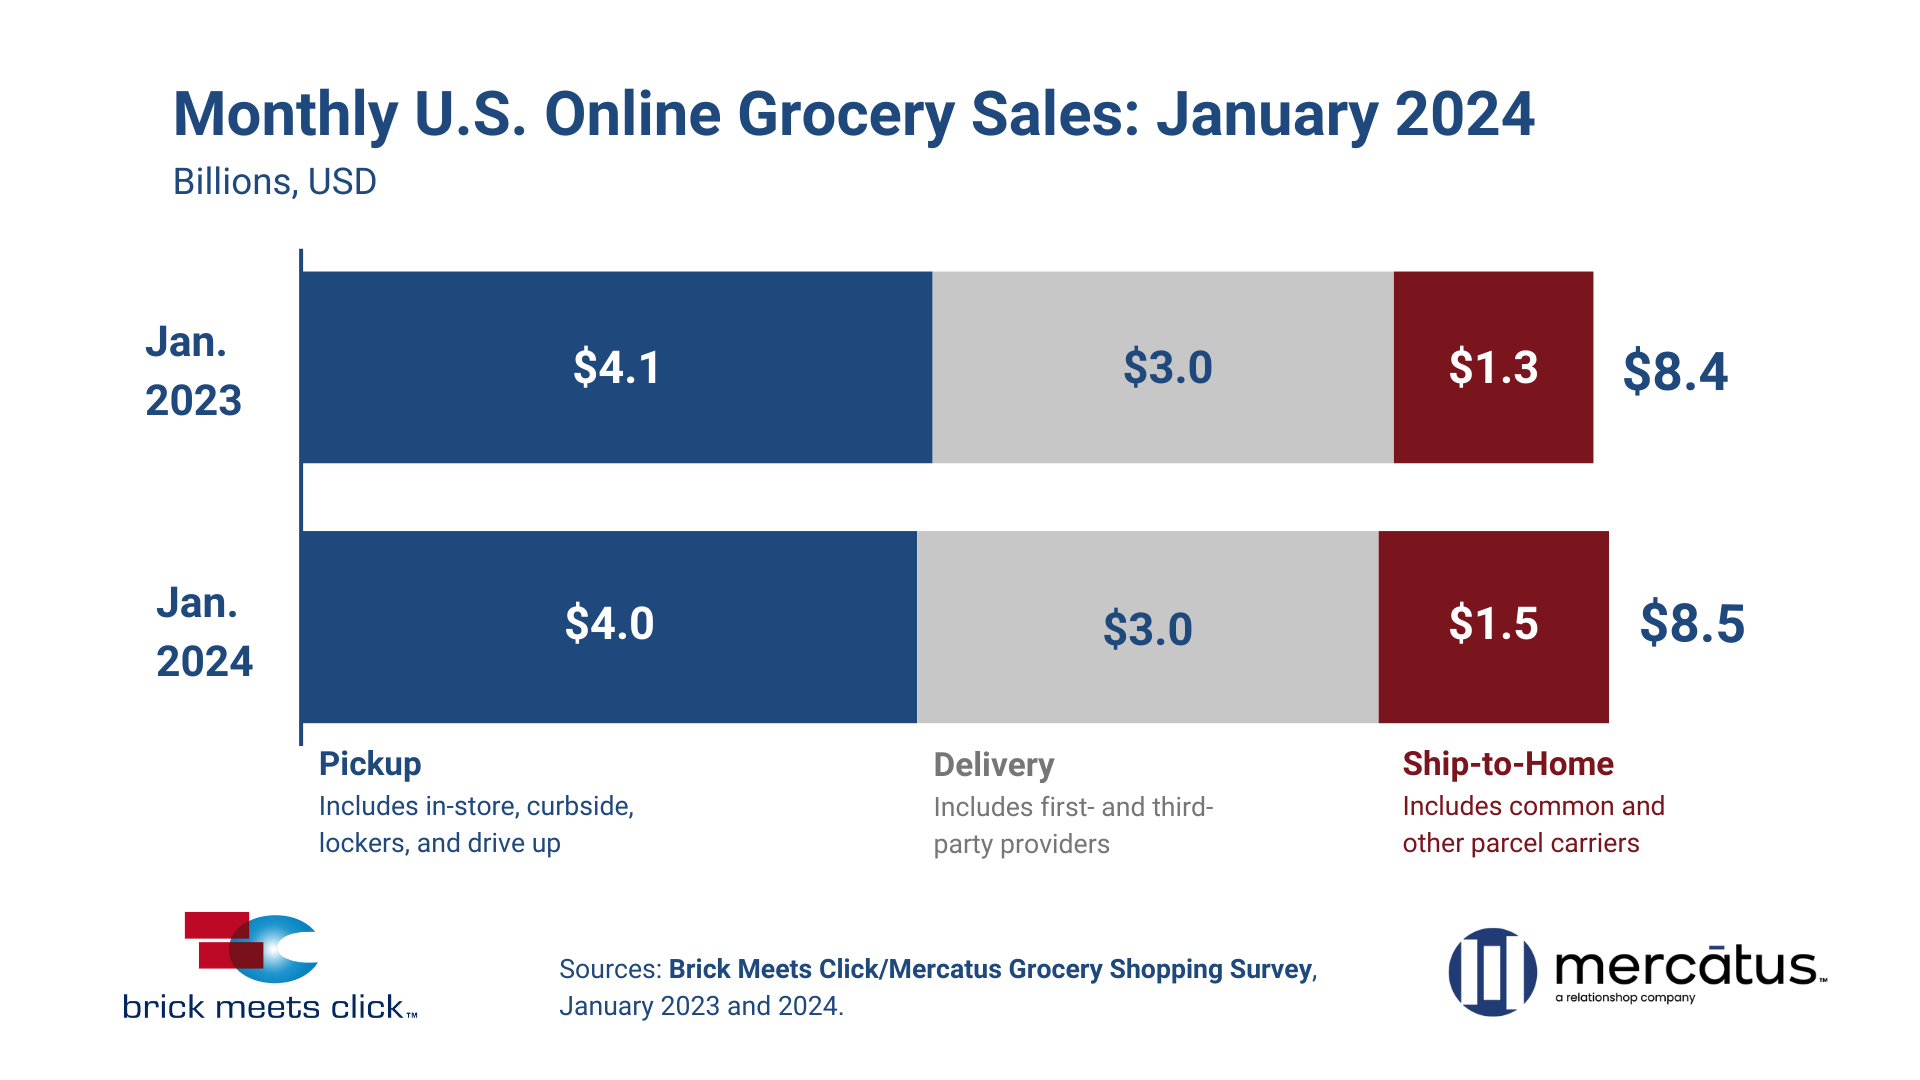 Online grocery sales grow in January to start the year